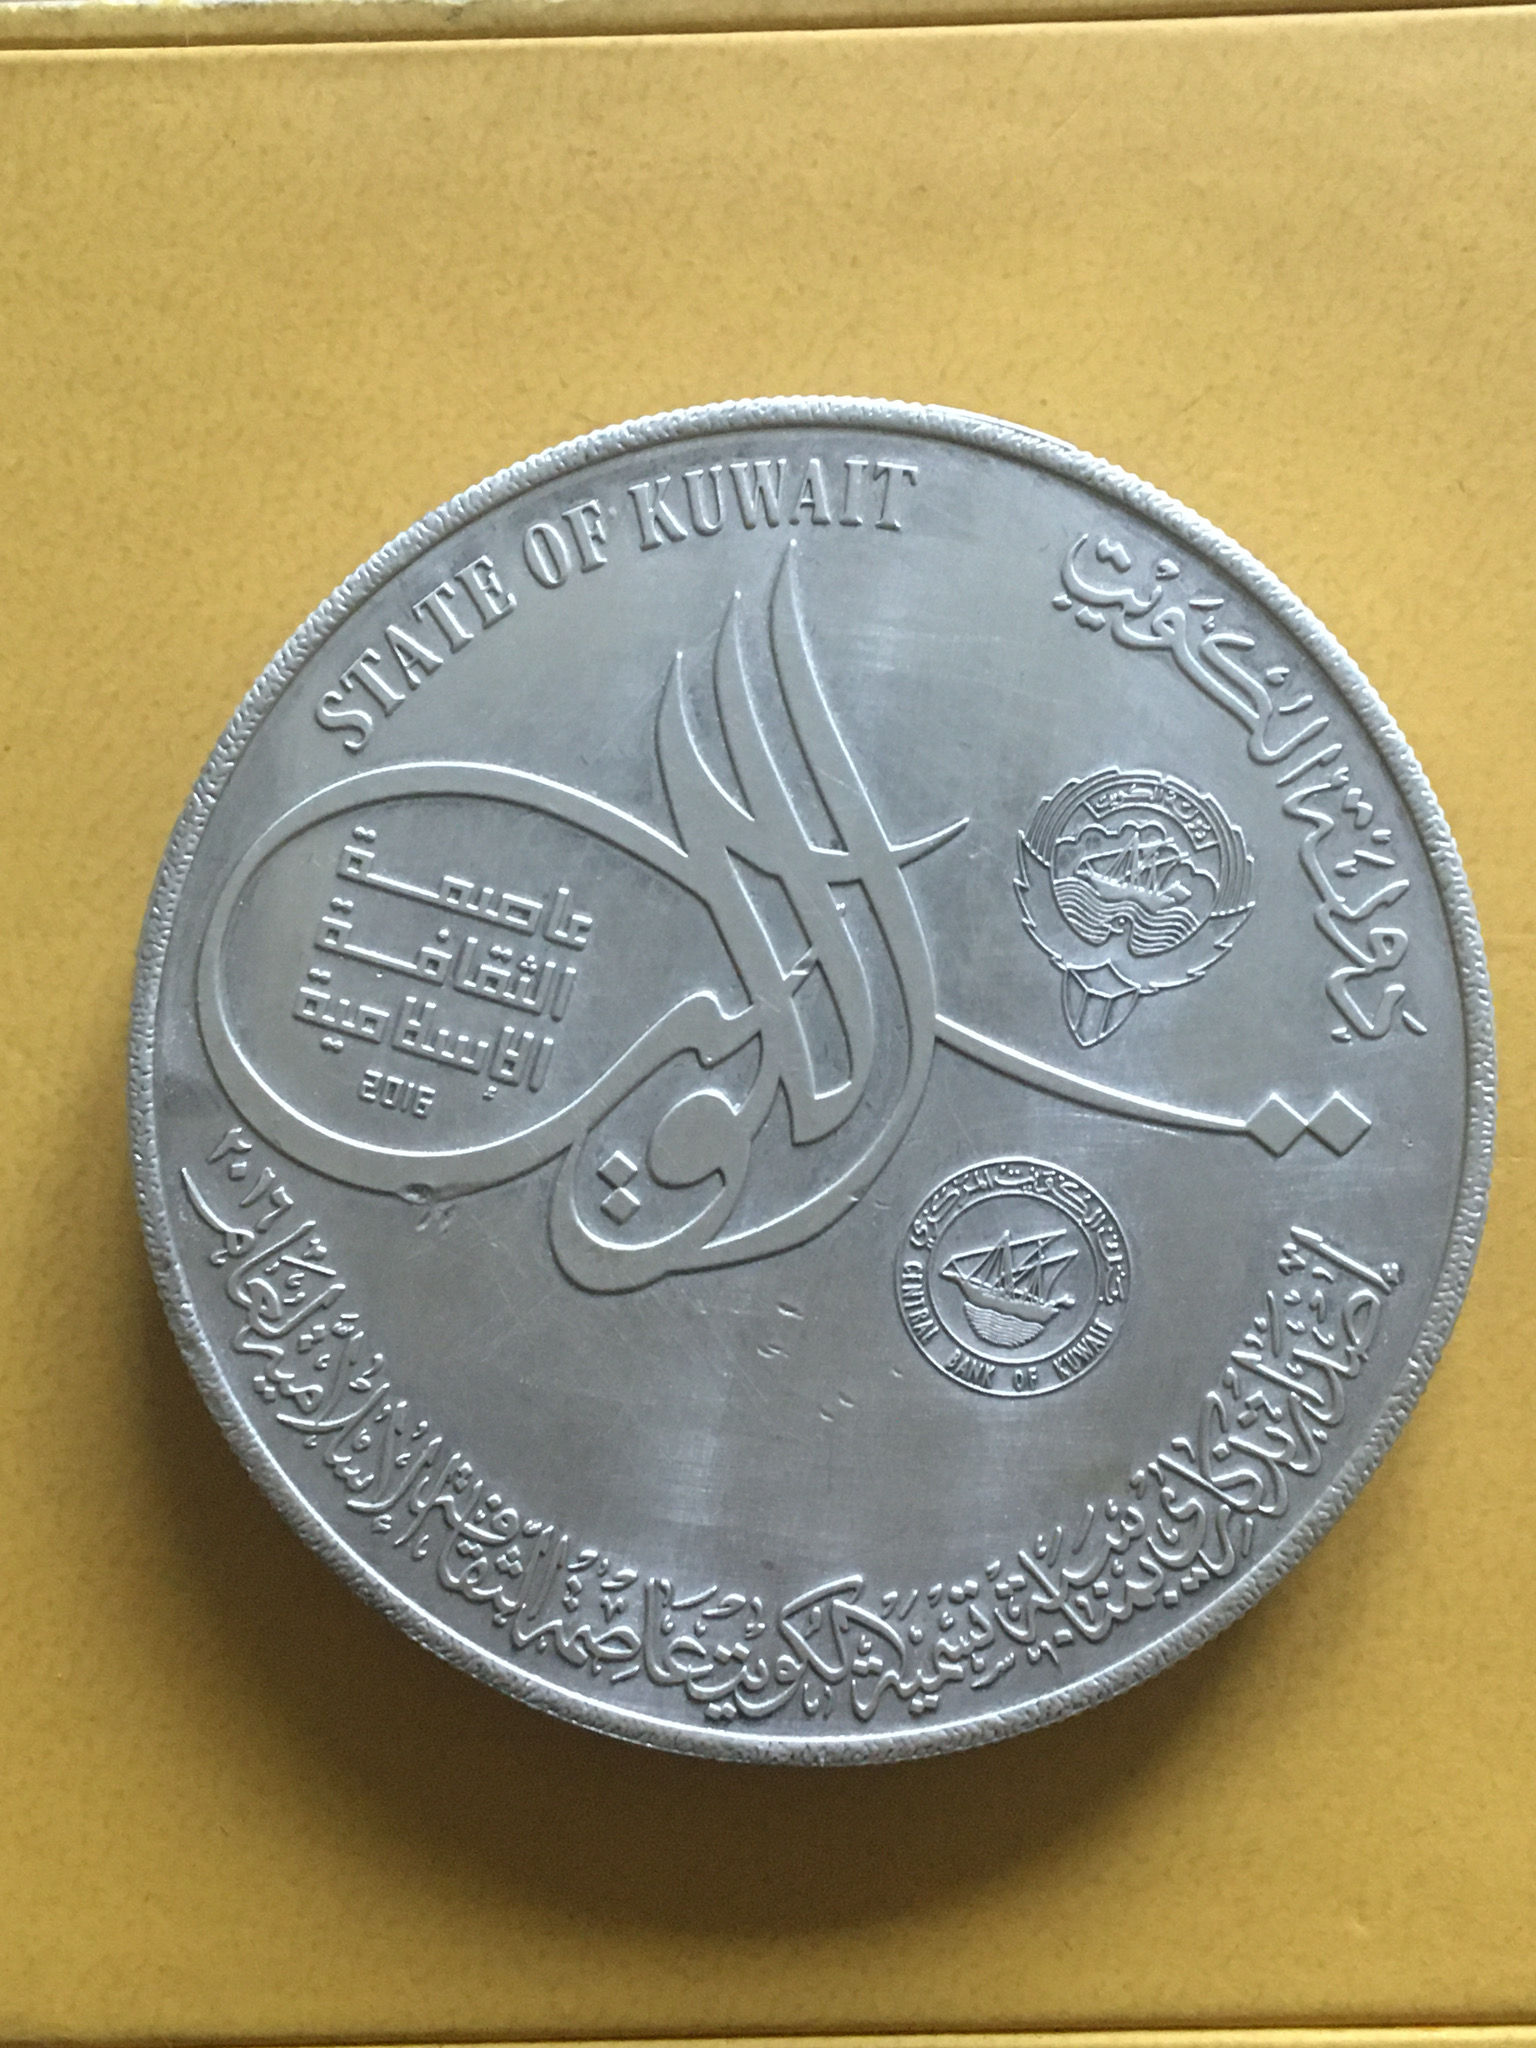 2016 Kuwait Capital of Islamic Culture 10 Dinars Silver Coin Only 110 Psc Minted